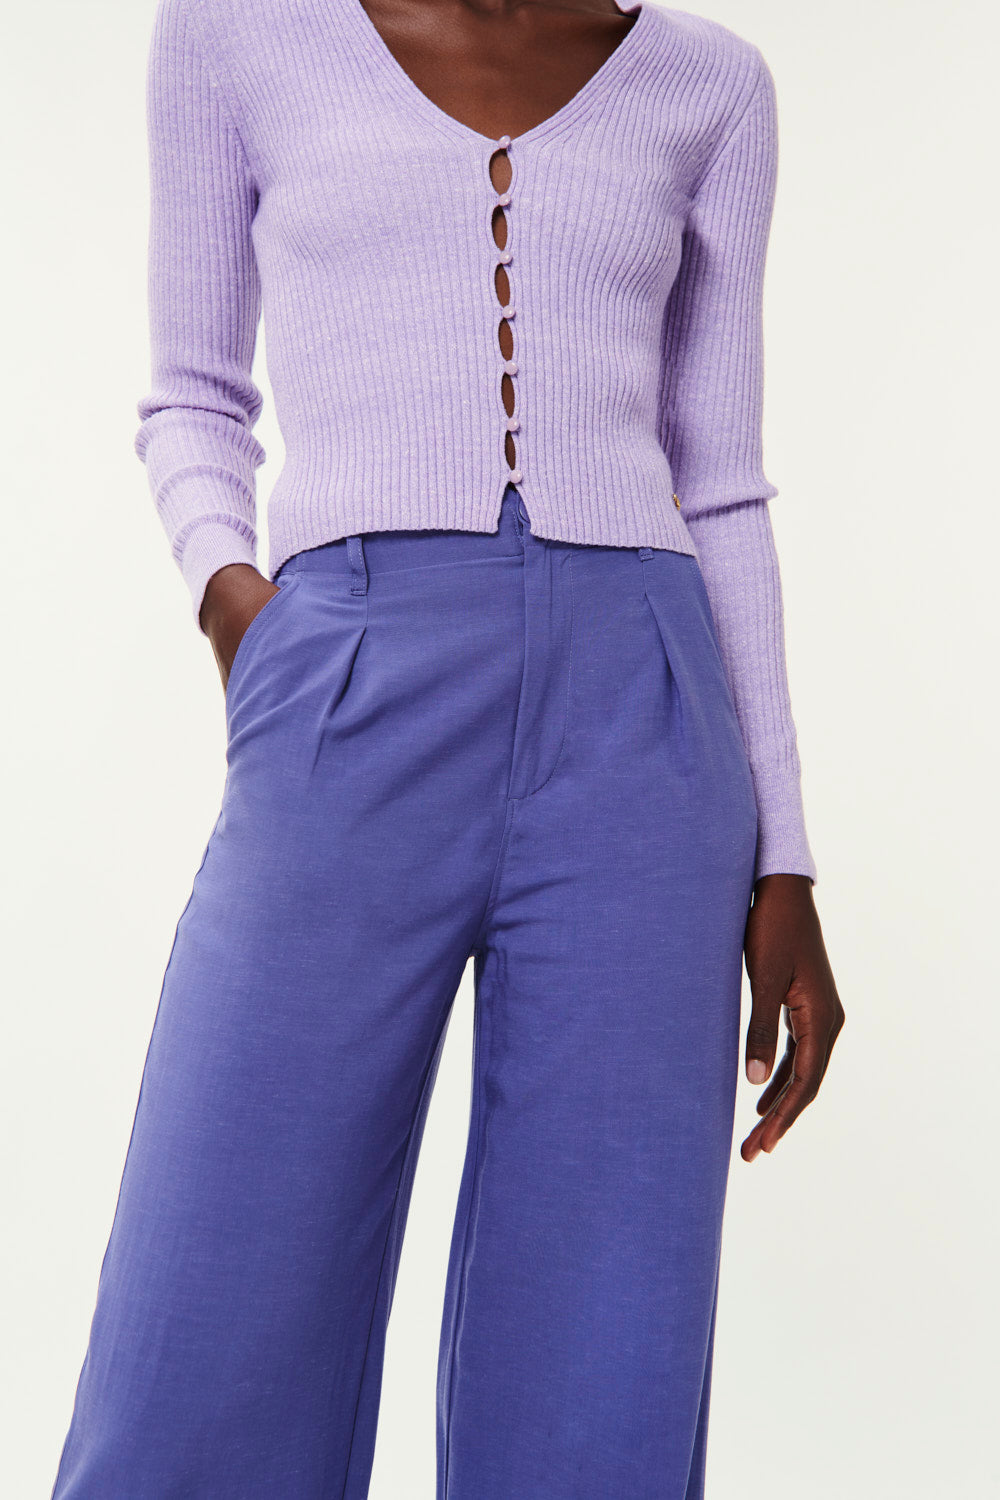 Espiza Figue Trousers